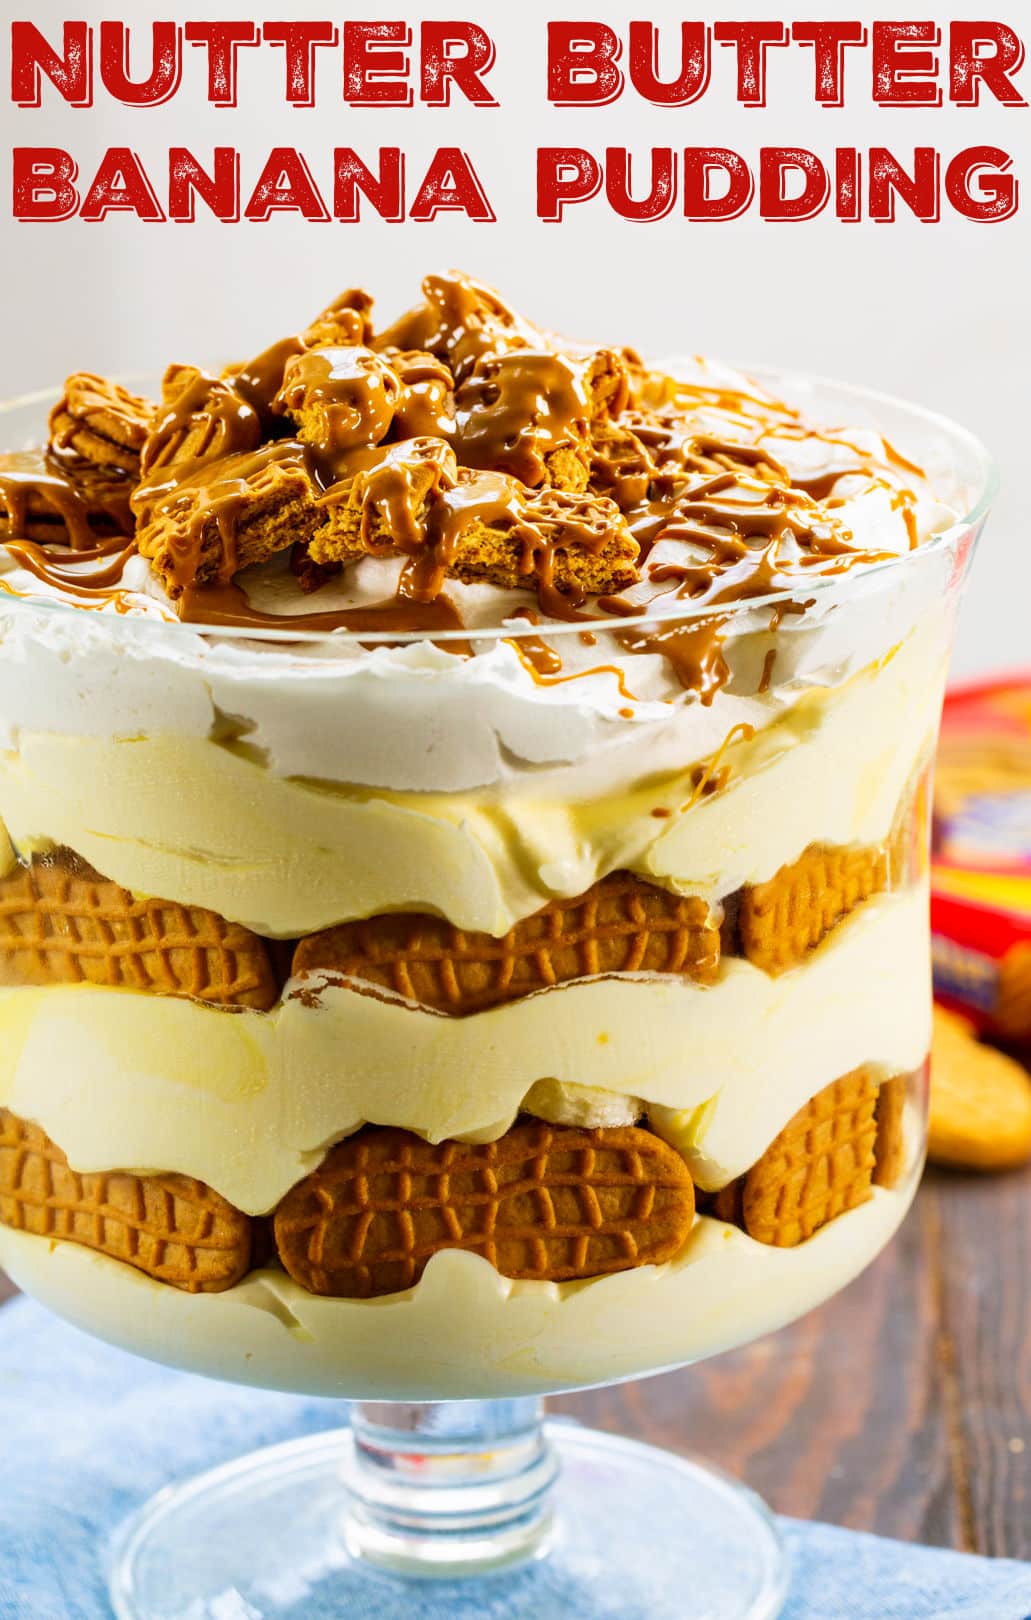 Nutter Butter Banana Pudding in trifle dish.